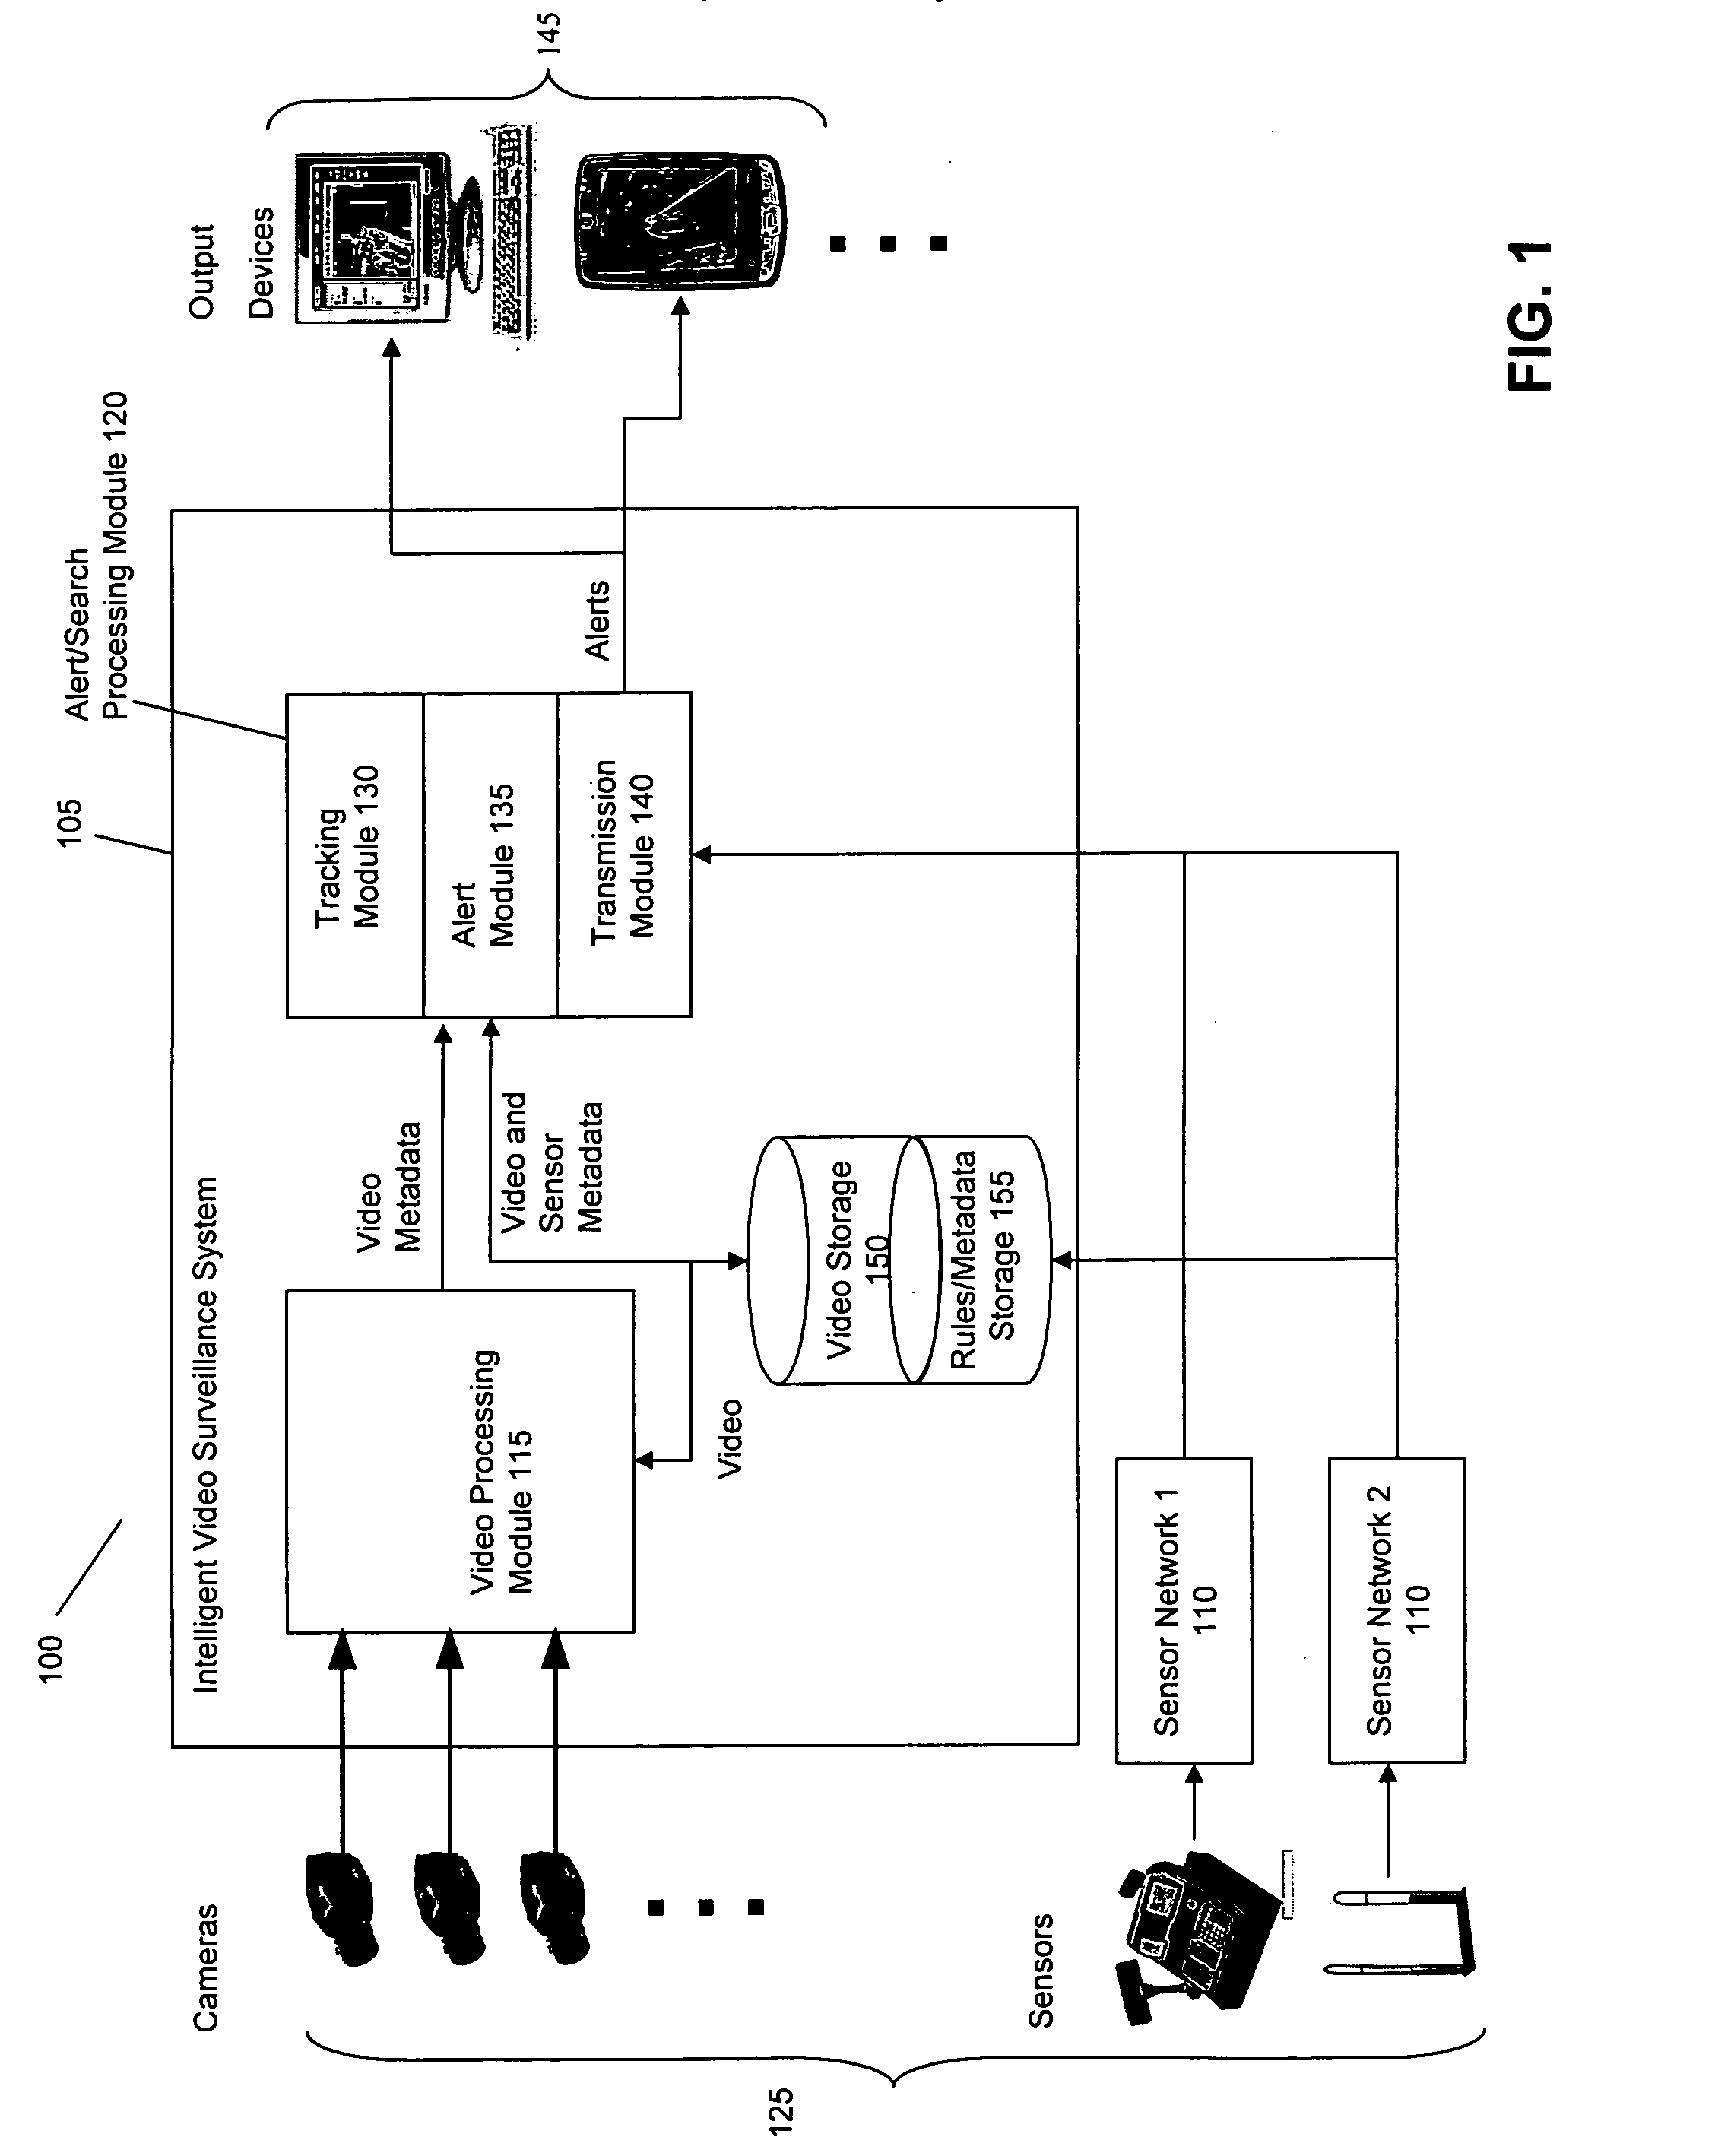 Systems and methods for distributed monitoring of remote sites